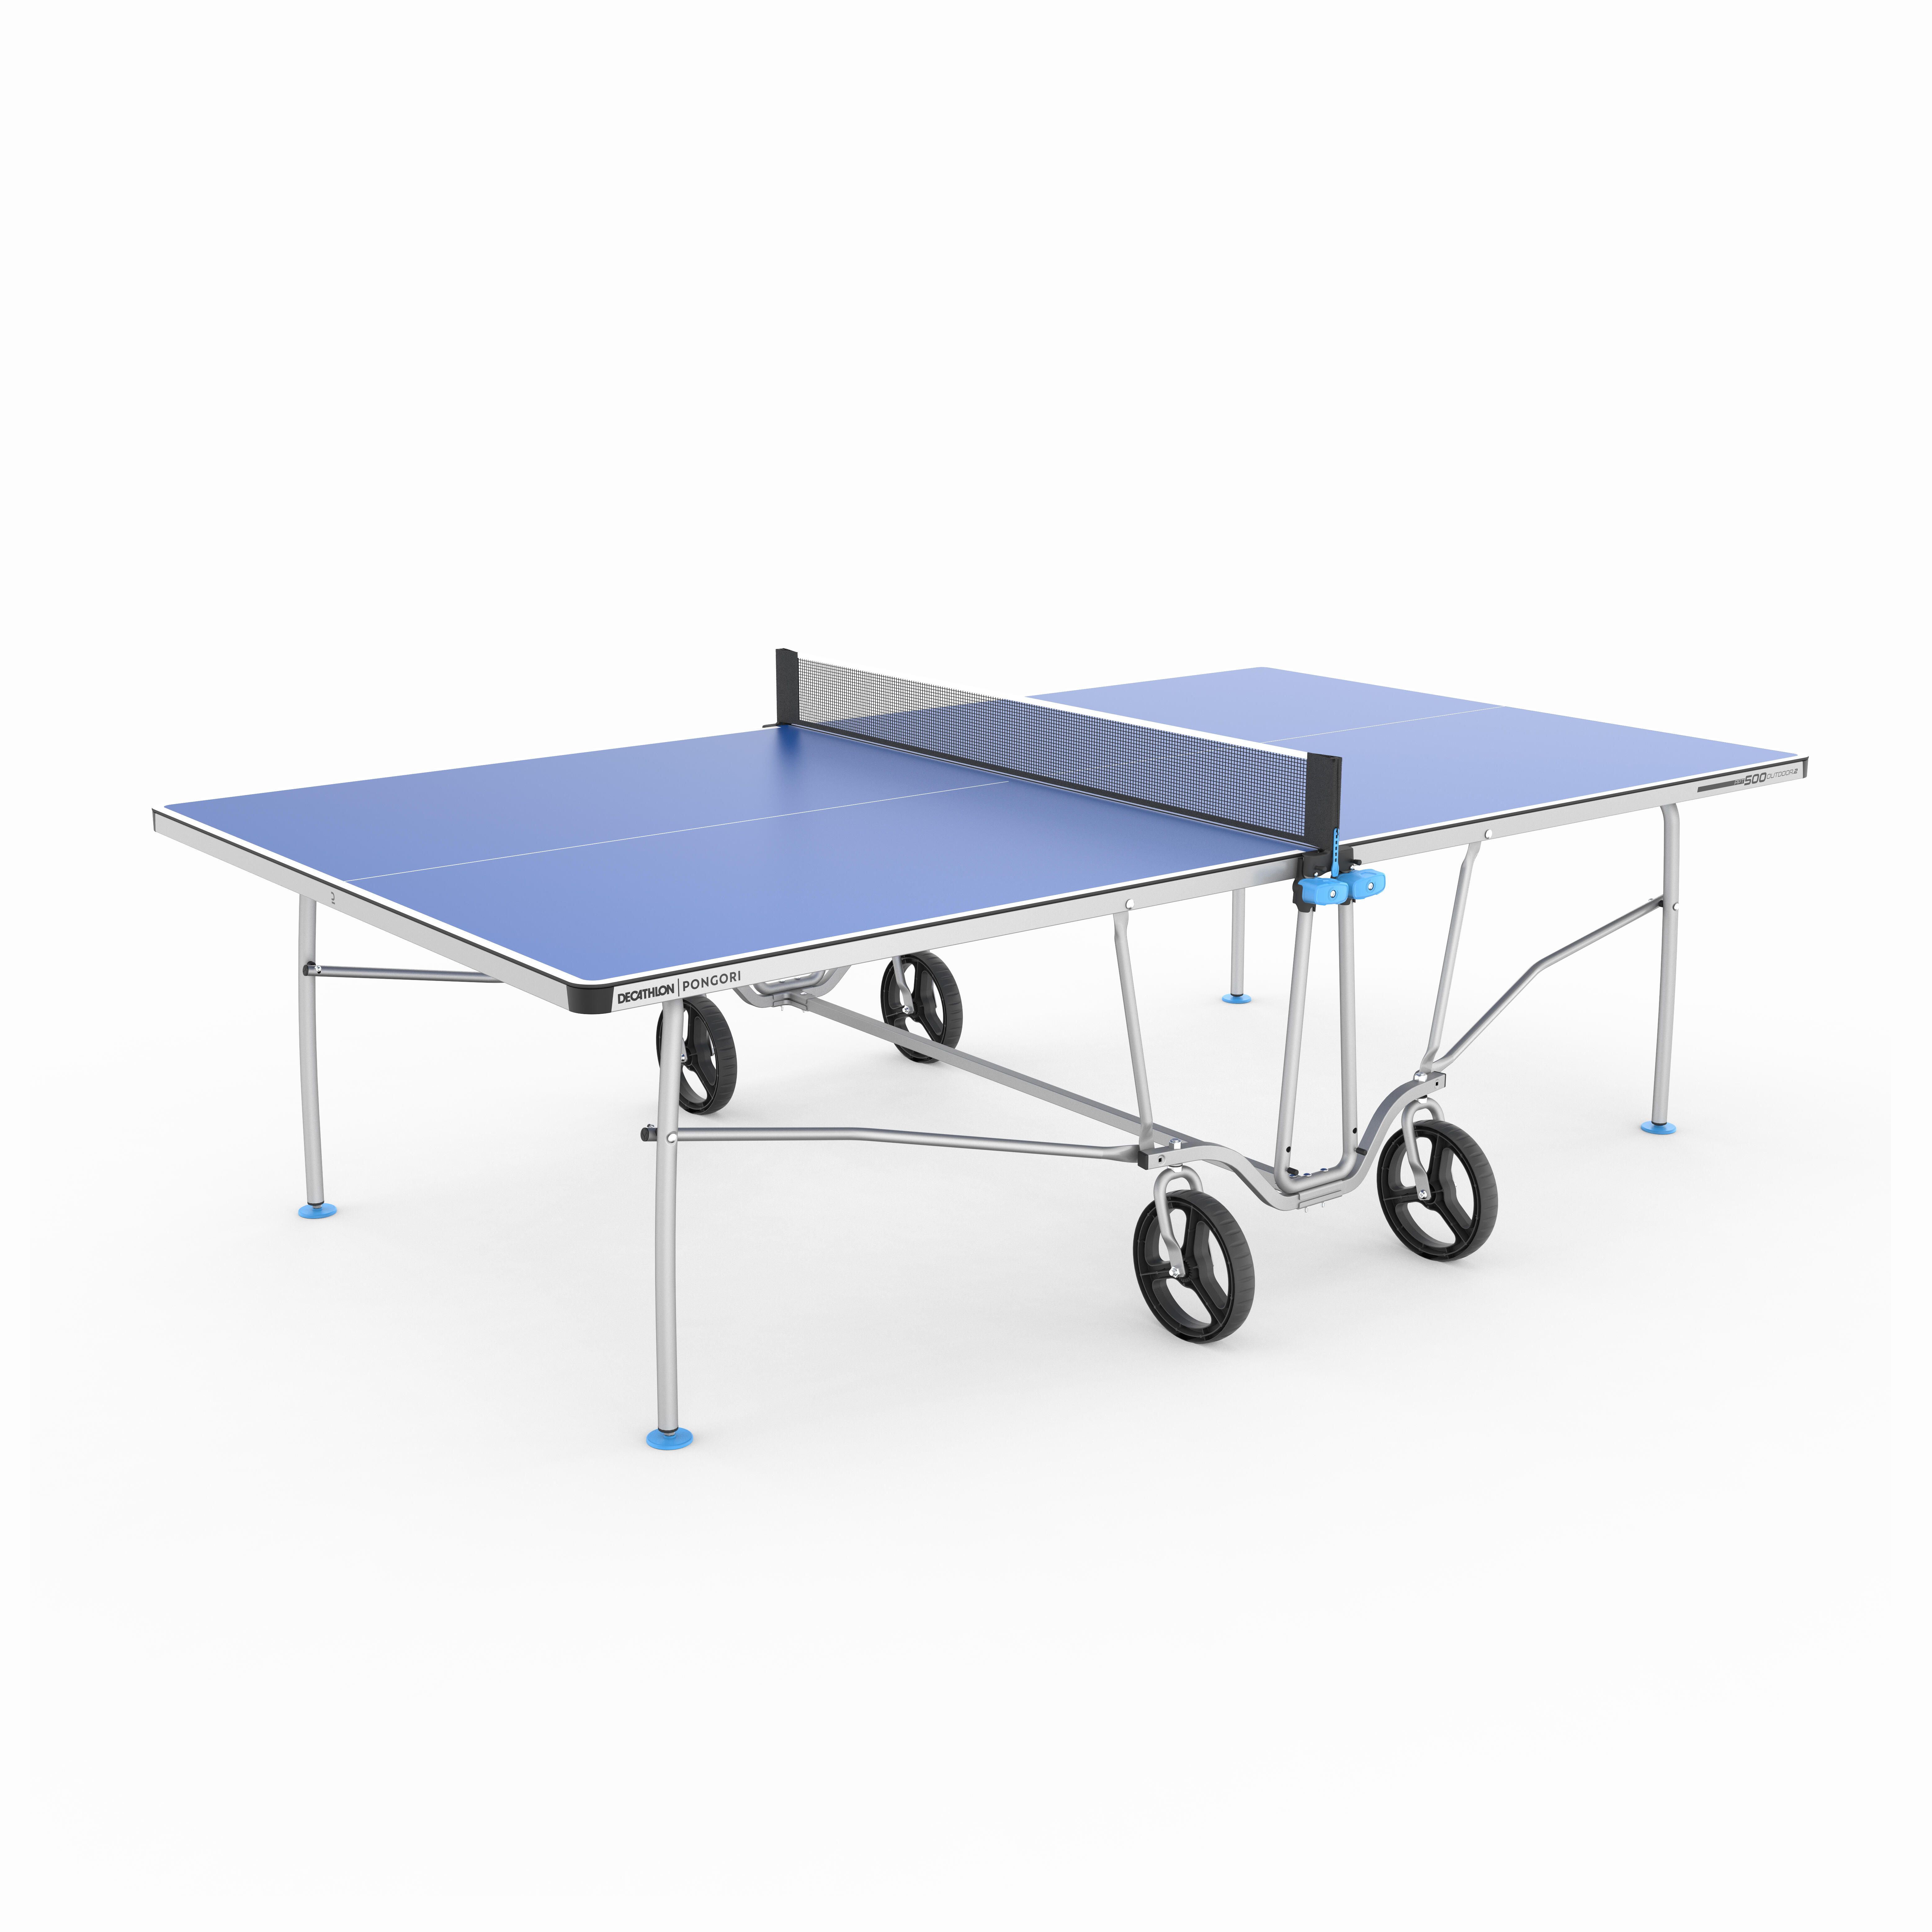 Table Tennis Table Outdoor - PPT 500.2 Blue